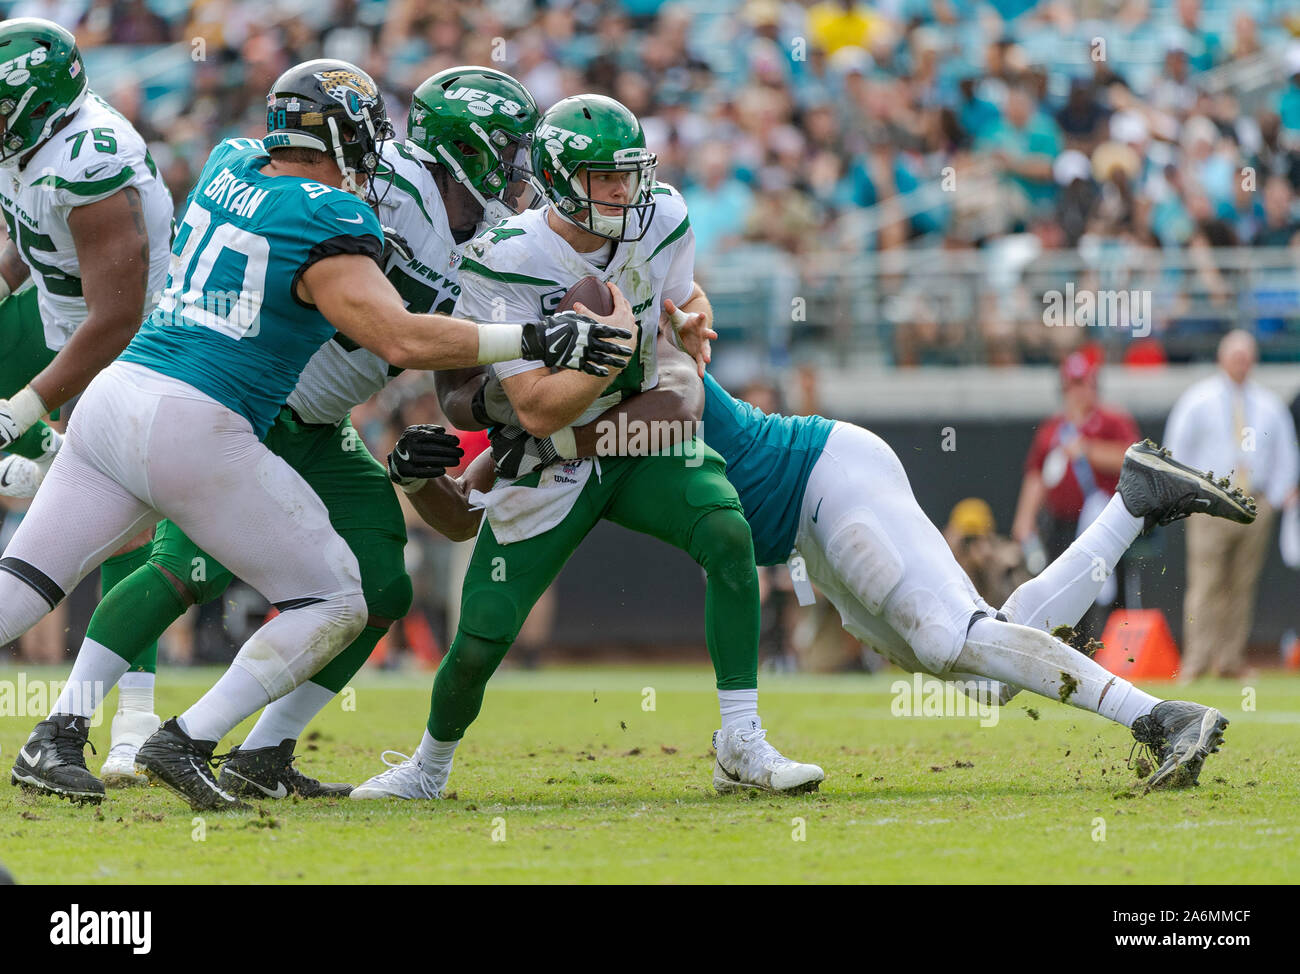 Jacksonville, FL, USA. 27th Oct, 2019. /n14 is sacked by Jacksonville defensive end Calais Campbell (93) during 2nd half NFL football game between the New York Jets and the Jacksonville Jaguars. Jaguars defeated Jets 29-15 at TIAA Bank Field in Jacksonville, Fl. Romeo T Guzman/CSM/Alamy Live News Stock Photo